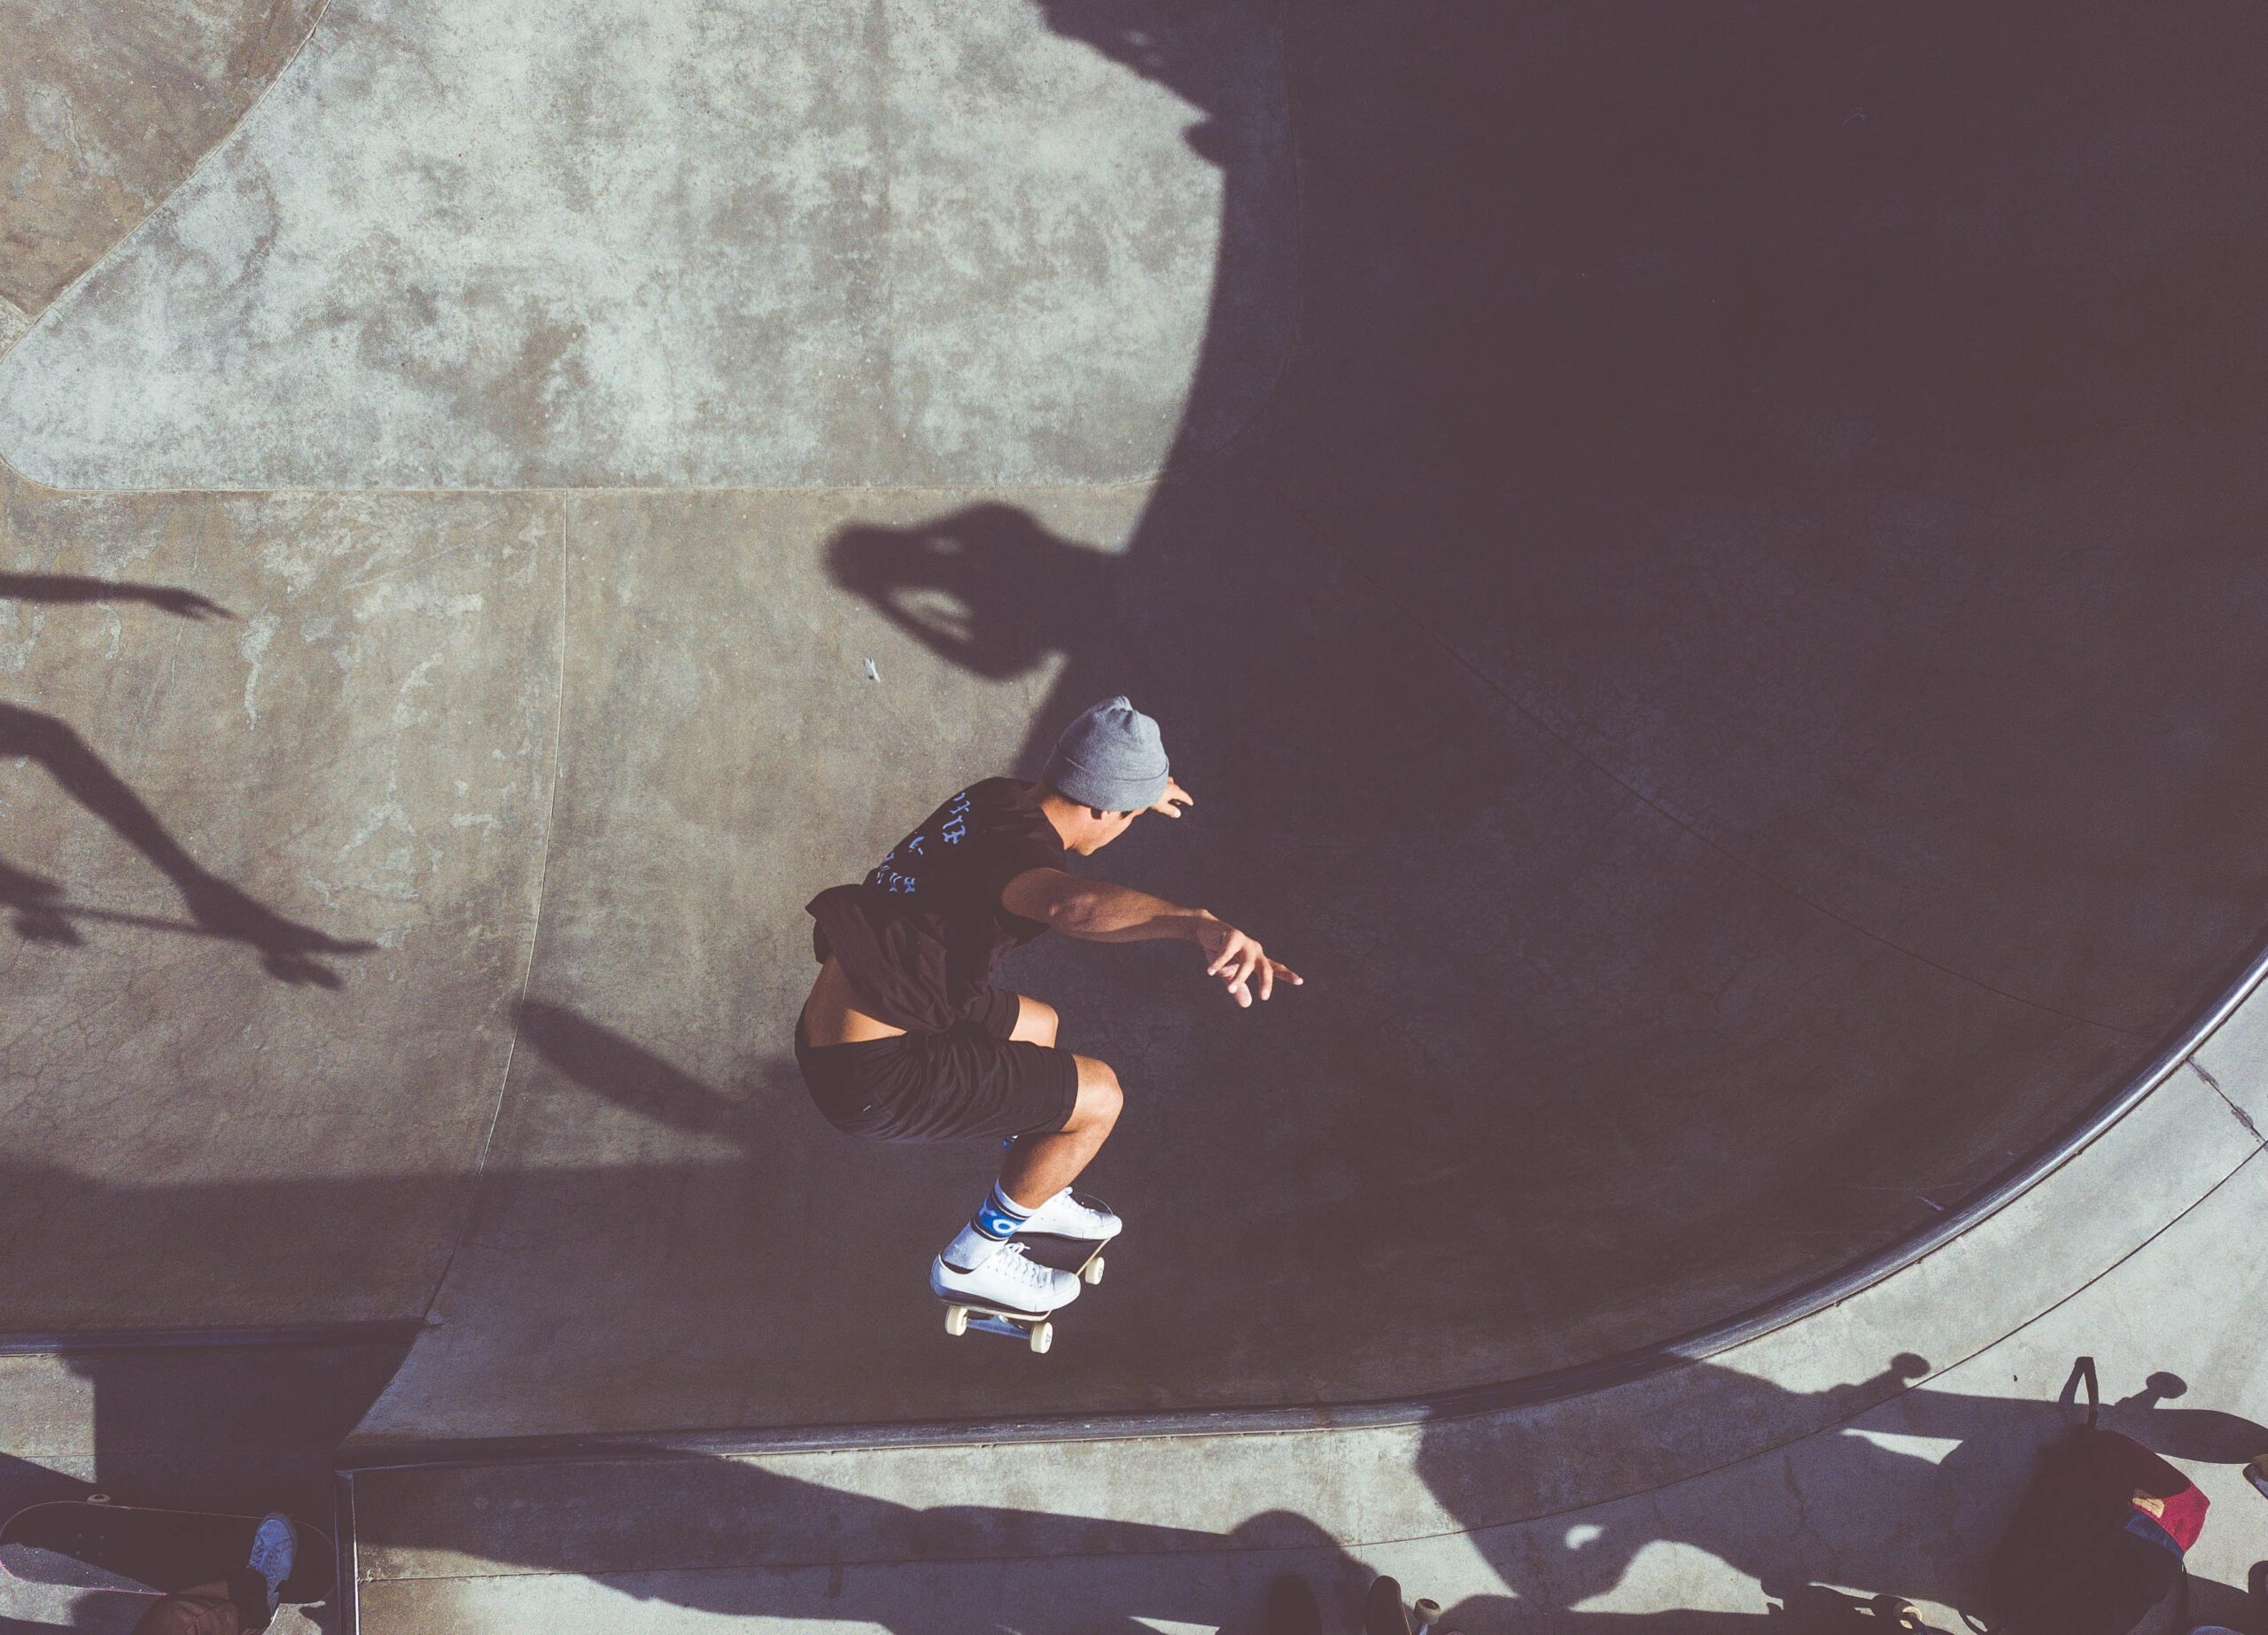 What Are The Options For Skateboard Helmets With Advanced Safety Features?